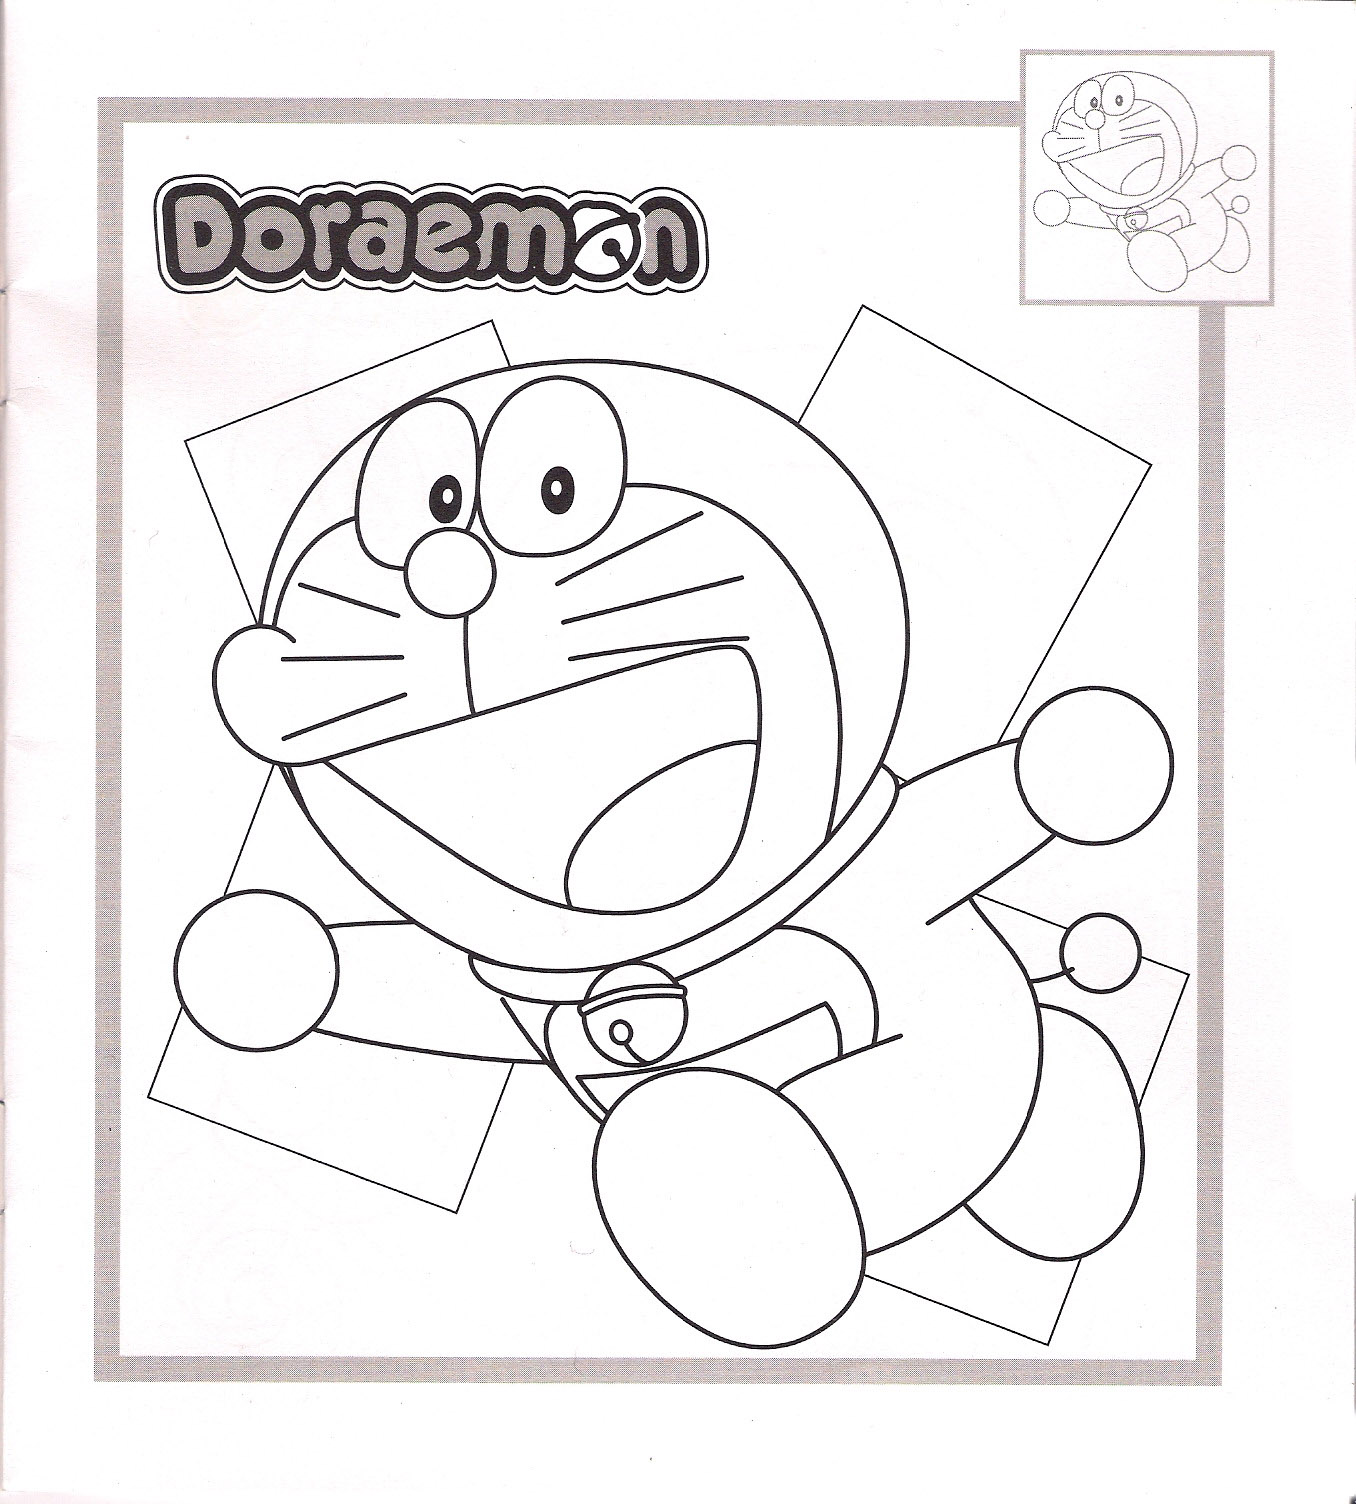 Doraemon Coloring in Pages 9